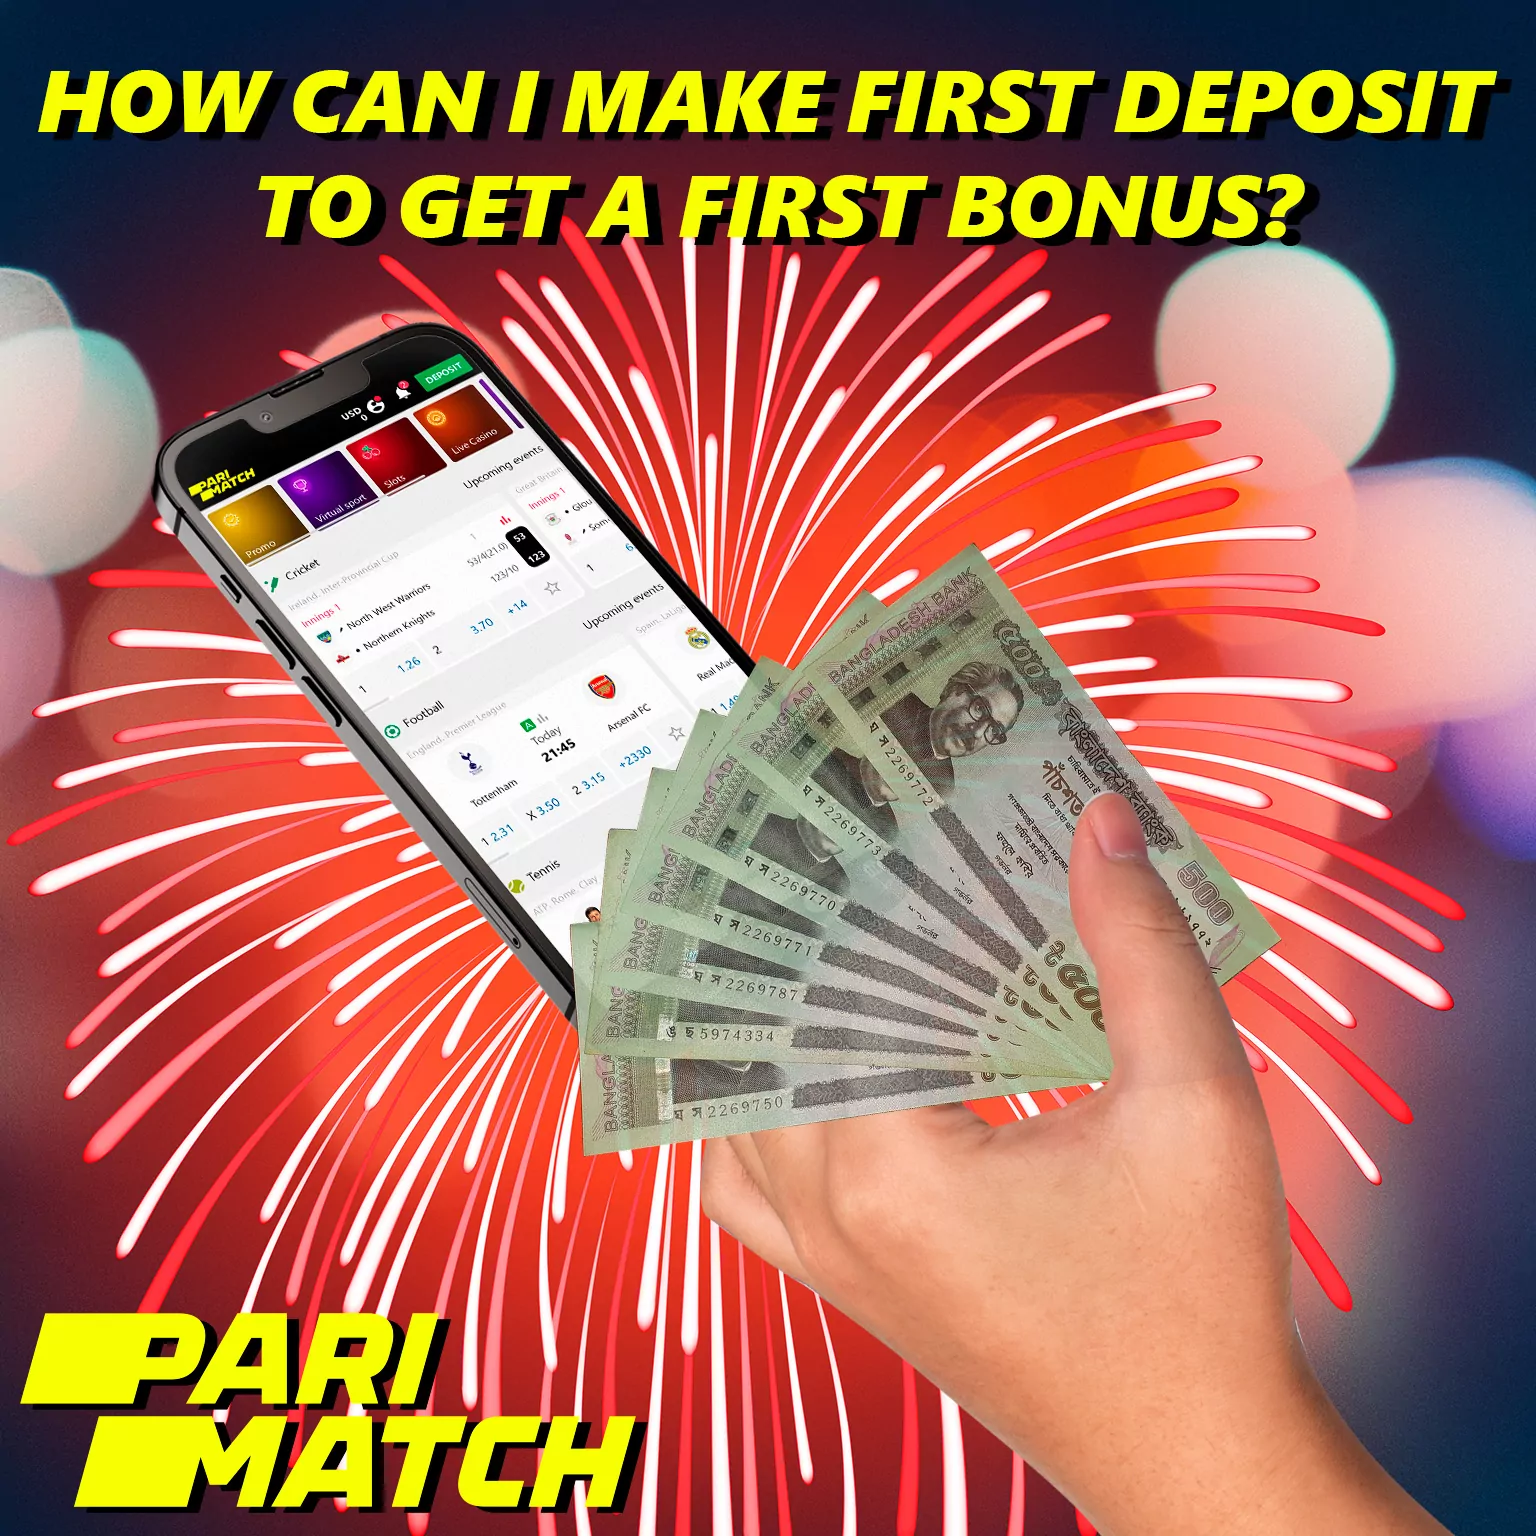 All Parimatch bonuses require a first deposit, the amount may vary, but the procedure is always the same.